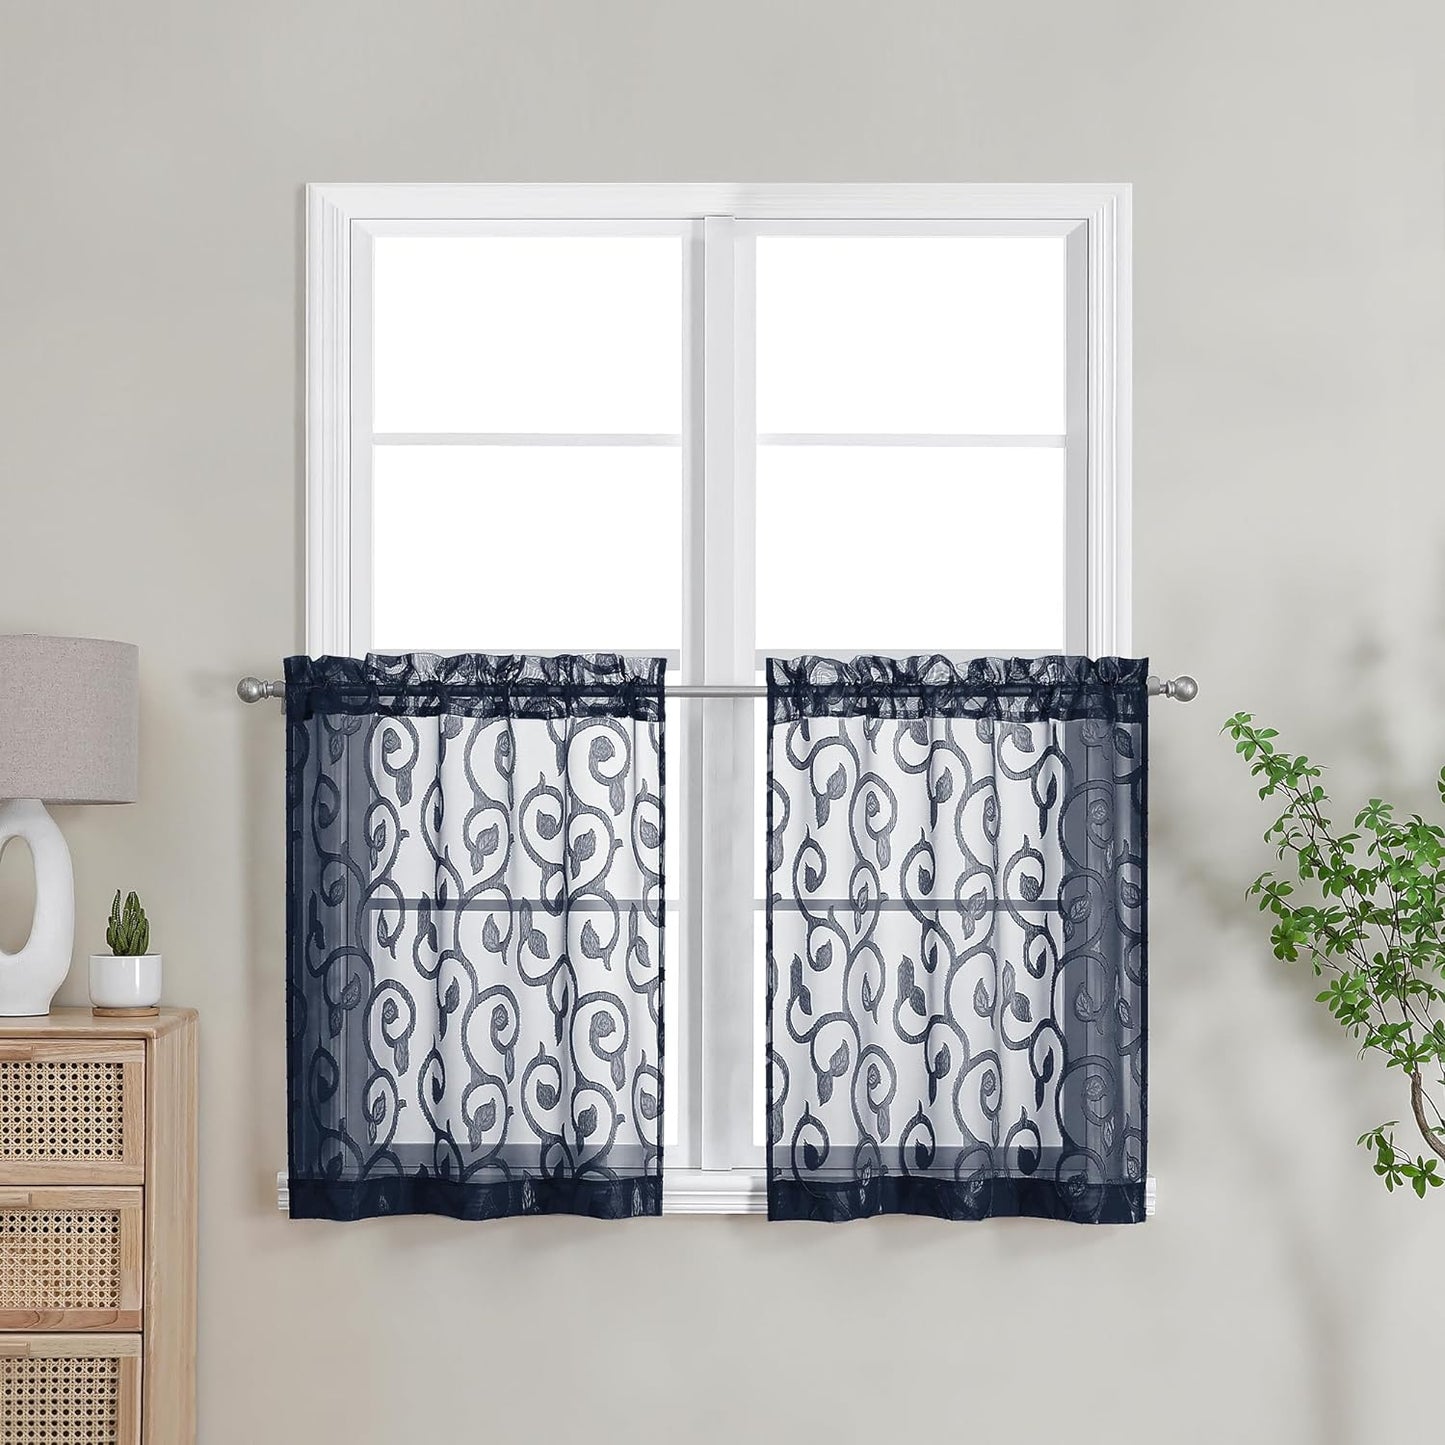 OWENIE Furman Sheer Curtains 84 Inches Long for Bedroom Living Room 2 Panels Set, Light Filtering Window Curtains, Semi Transparent Voile Top Dual Rod Pocket, Grey, 40Wx84L Inch, Total 84 Inches Width  OWENIE Navy Blue 26W X 24L 